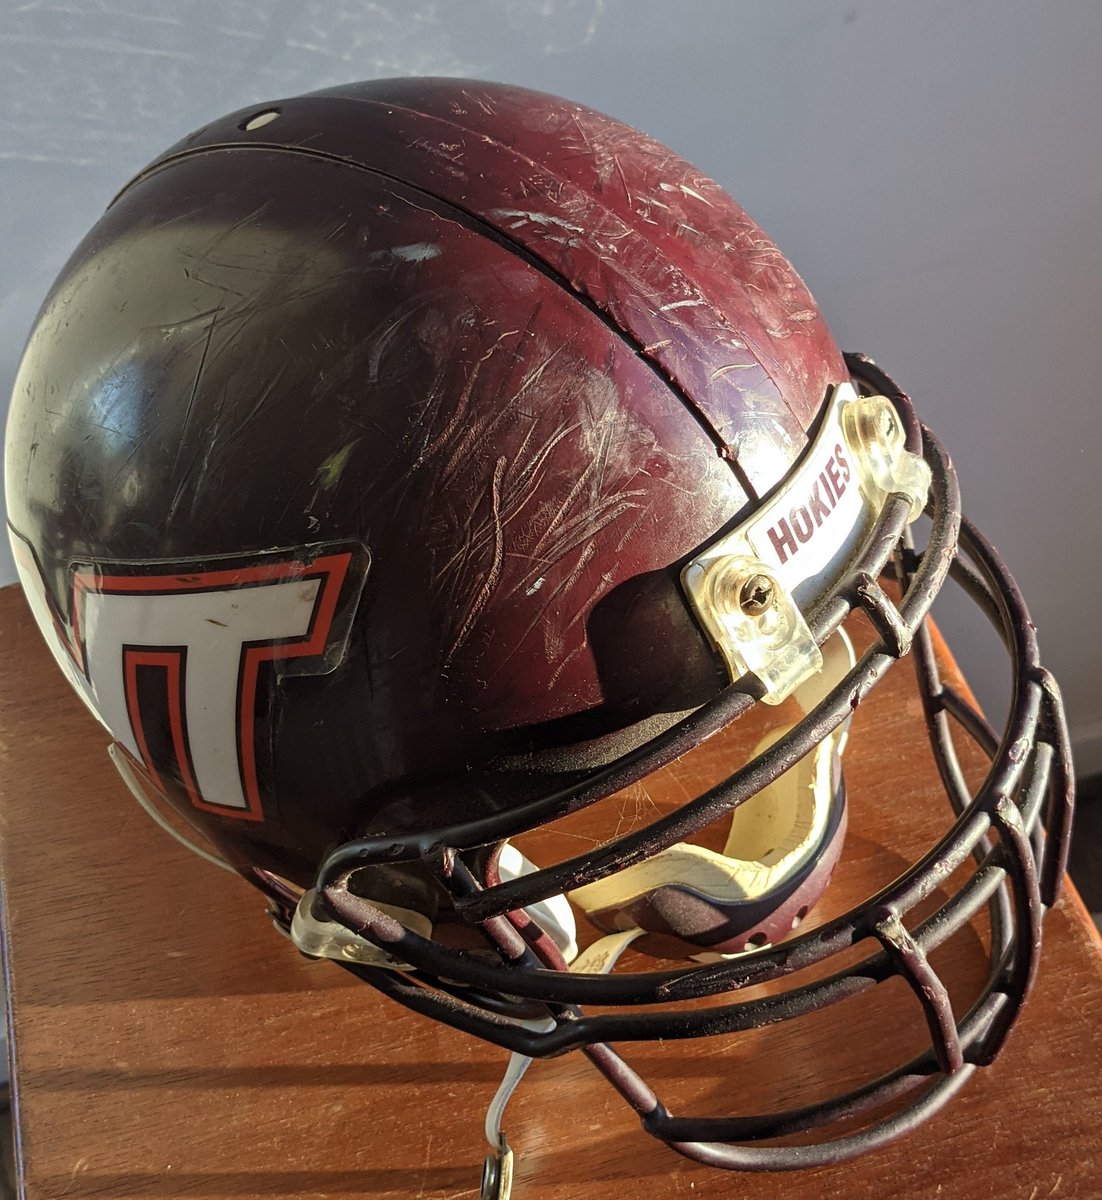 Felt like dusting it off #HokieNation... @vick757
got me feeling nostalgic...20+yrs ago practices were so intense it made games easier...No teams were tougher than us...It began & ended w/ #LOS...do the work #Hokies & #LeaveYourLegacy. Your 20+yrs will be here soon! #Brotherhood